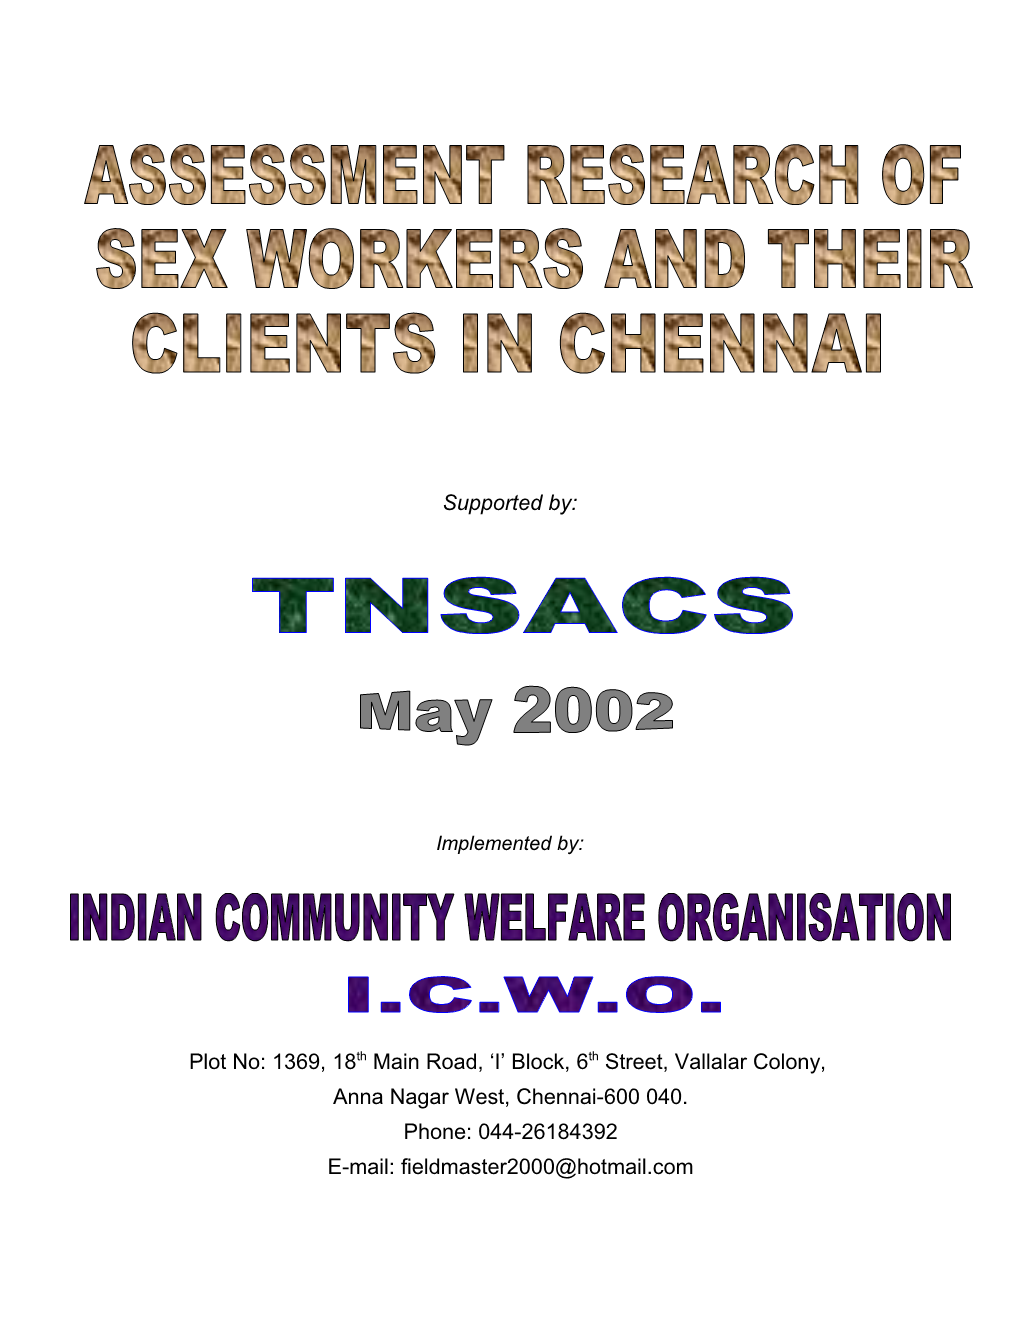 Assessment Research of Sex Workers and Their Clients in Chennai